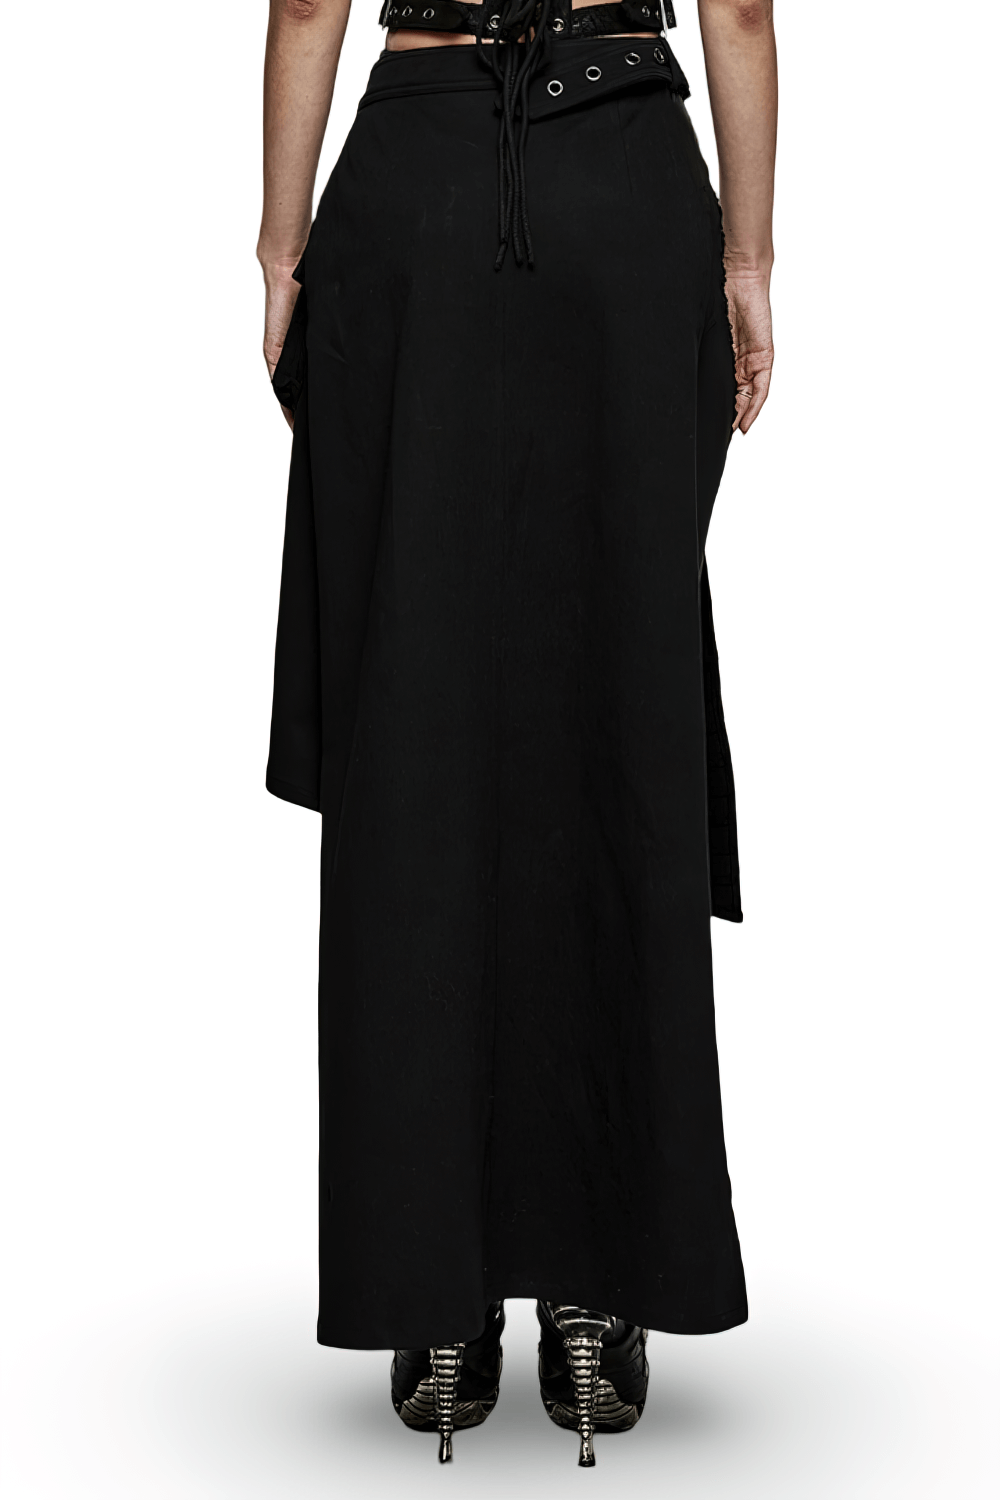 Black Wrap Maxi Skirt with Buckle Accents and Pockets